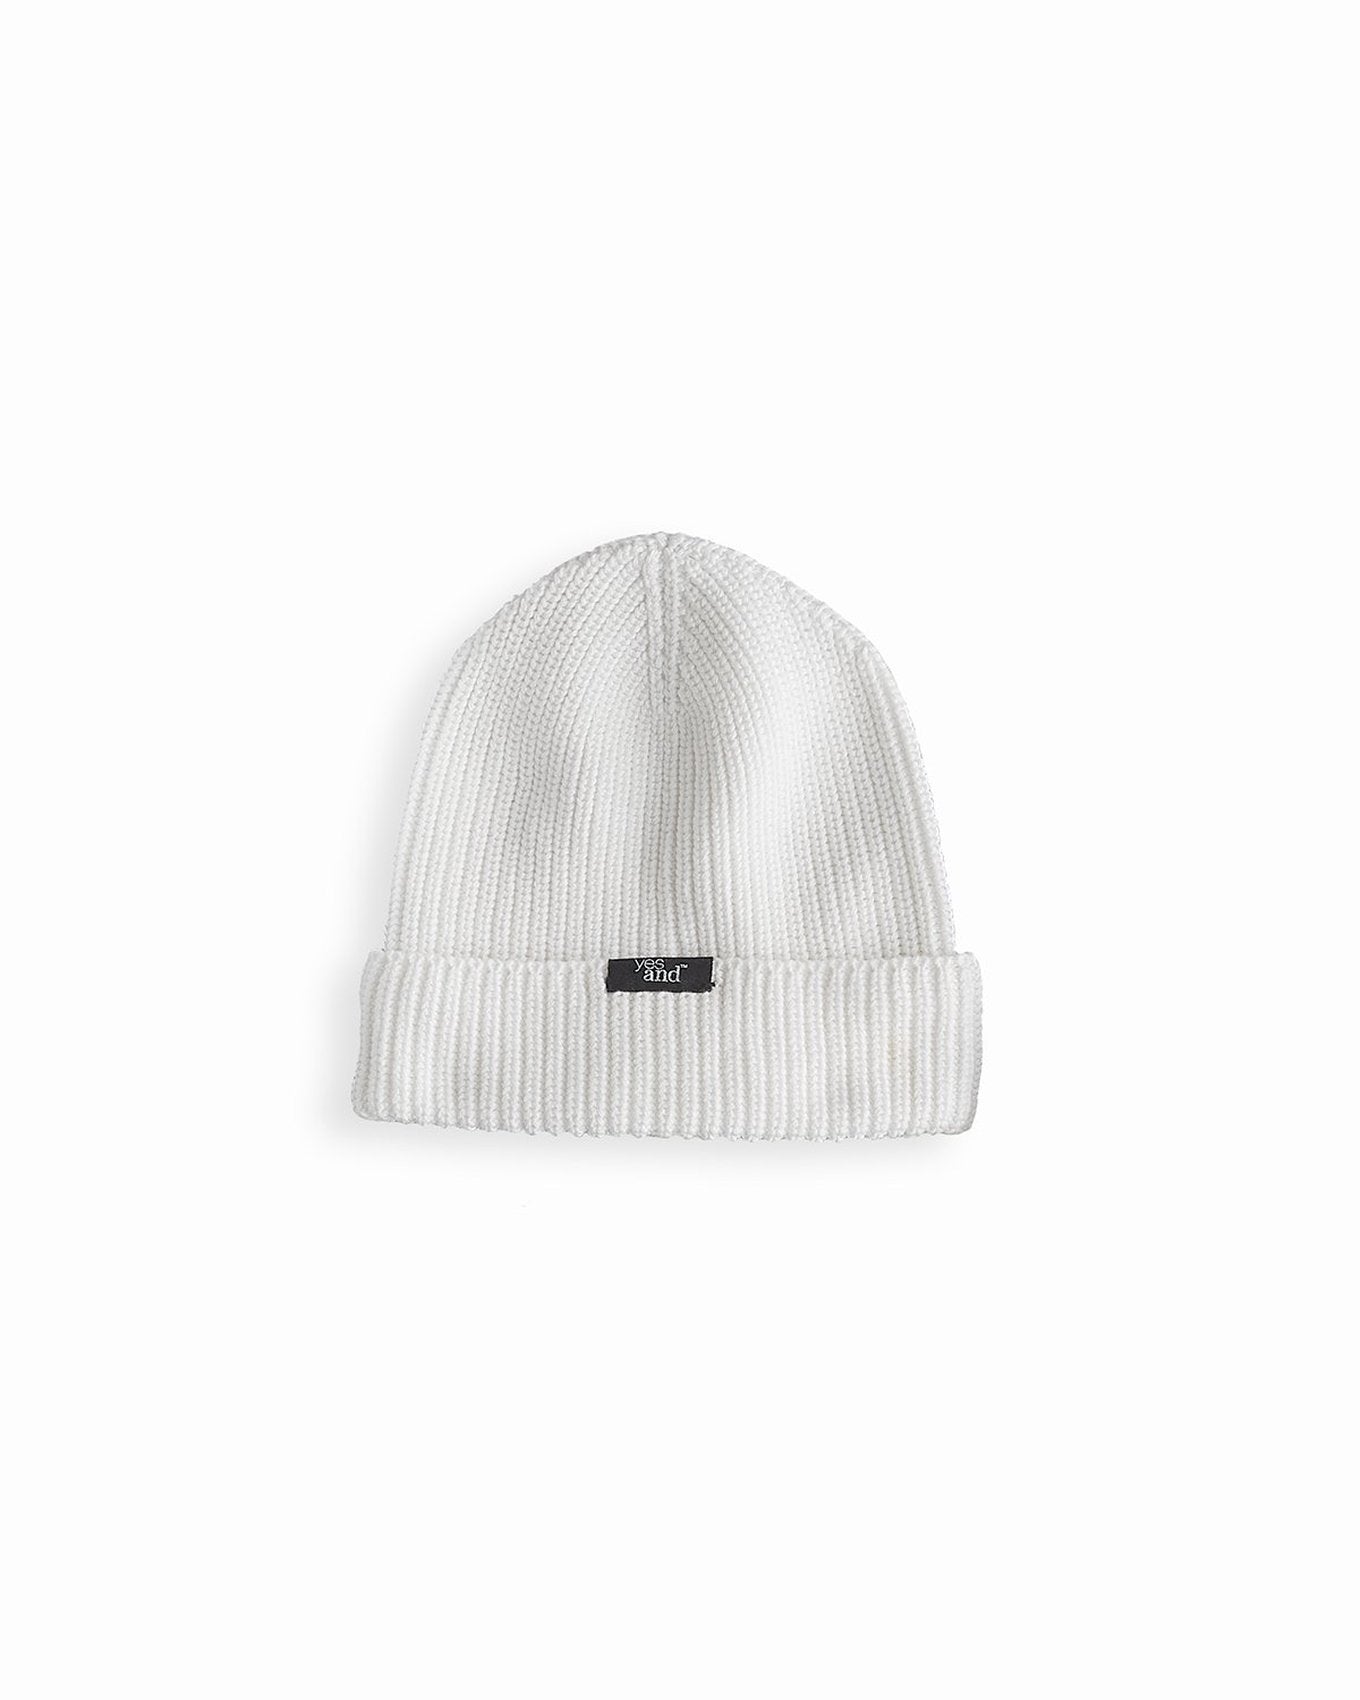 YesAnd Organic Knit Beanie Knit Beanie in color Bright White and shape beanie